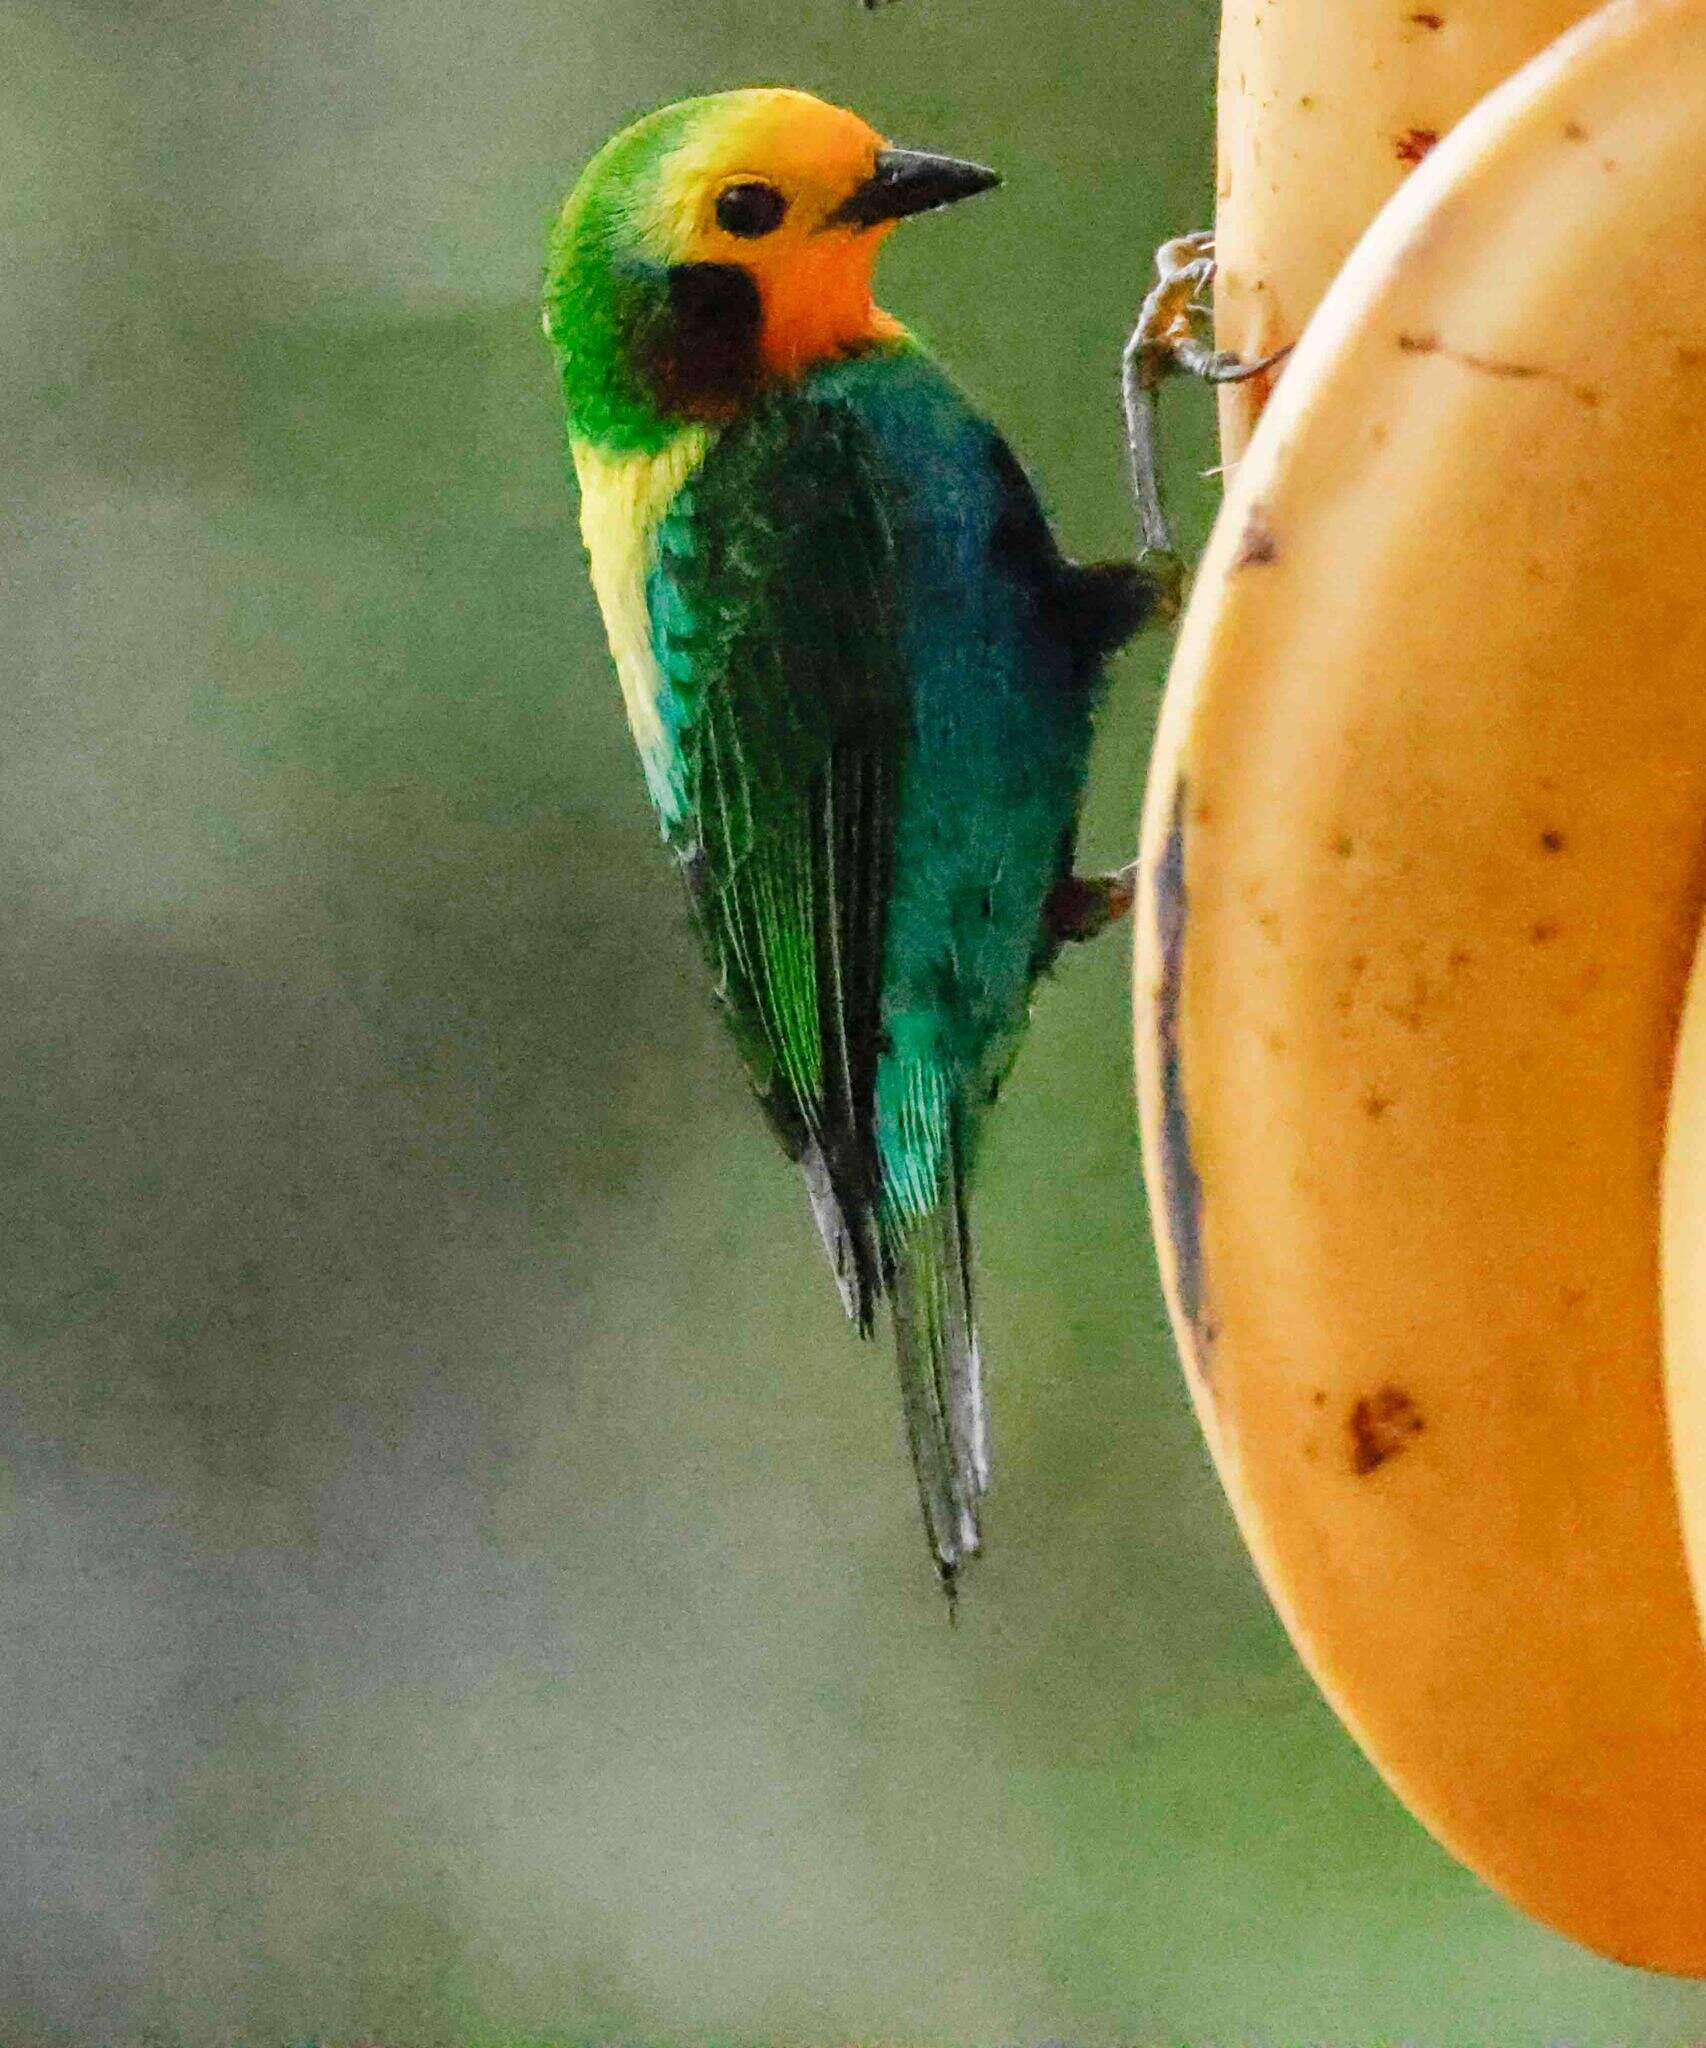 Image of Multicolored Tanager